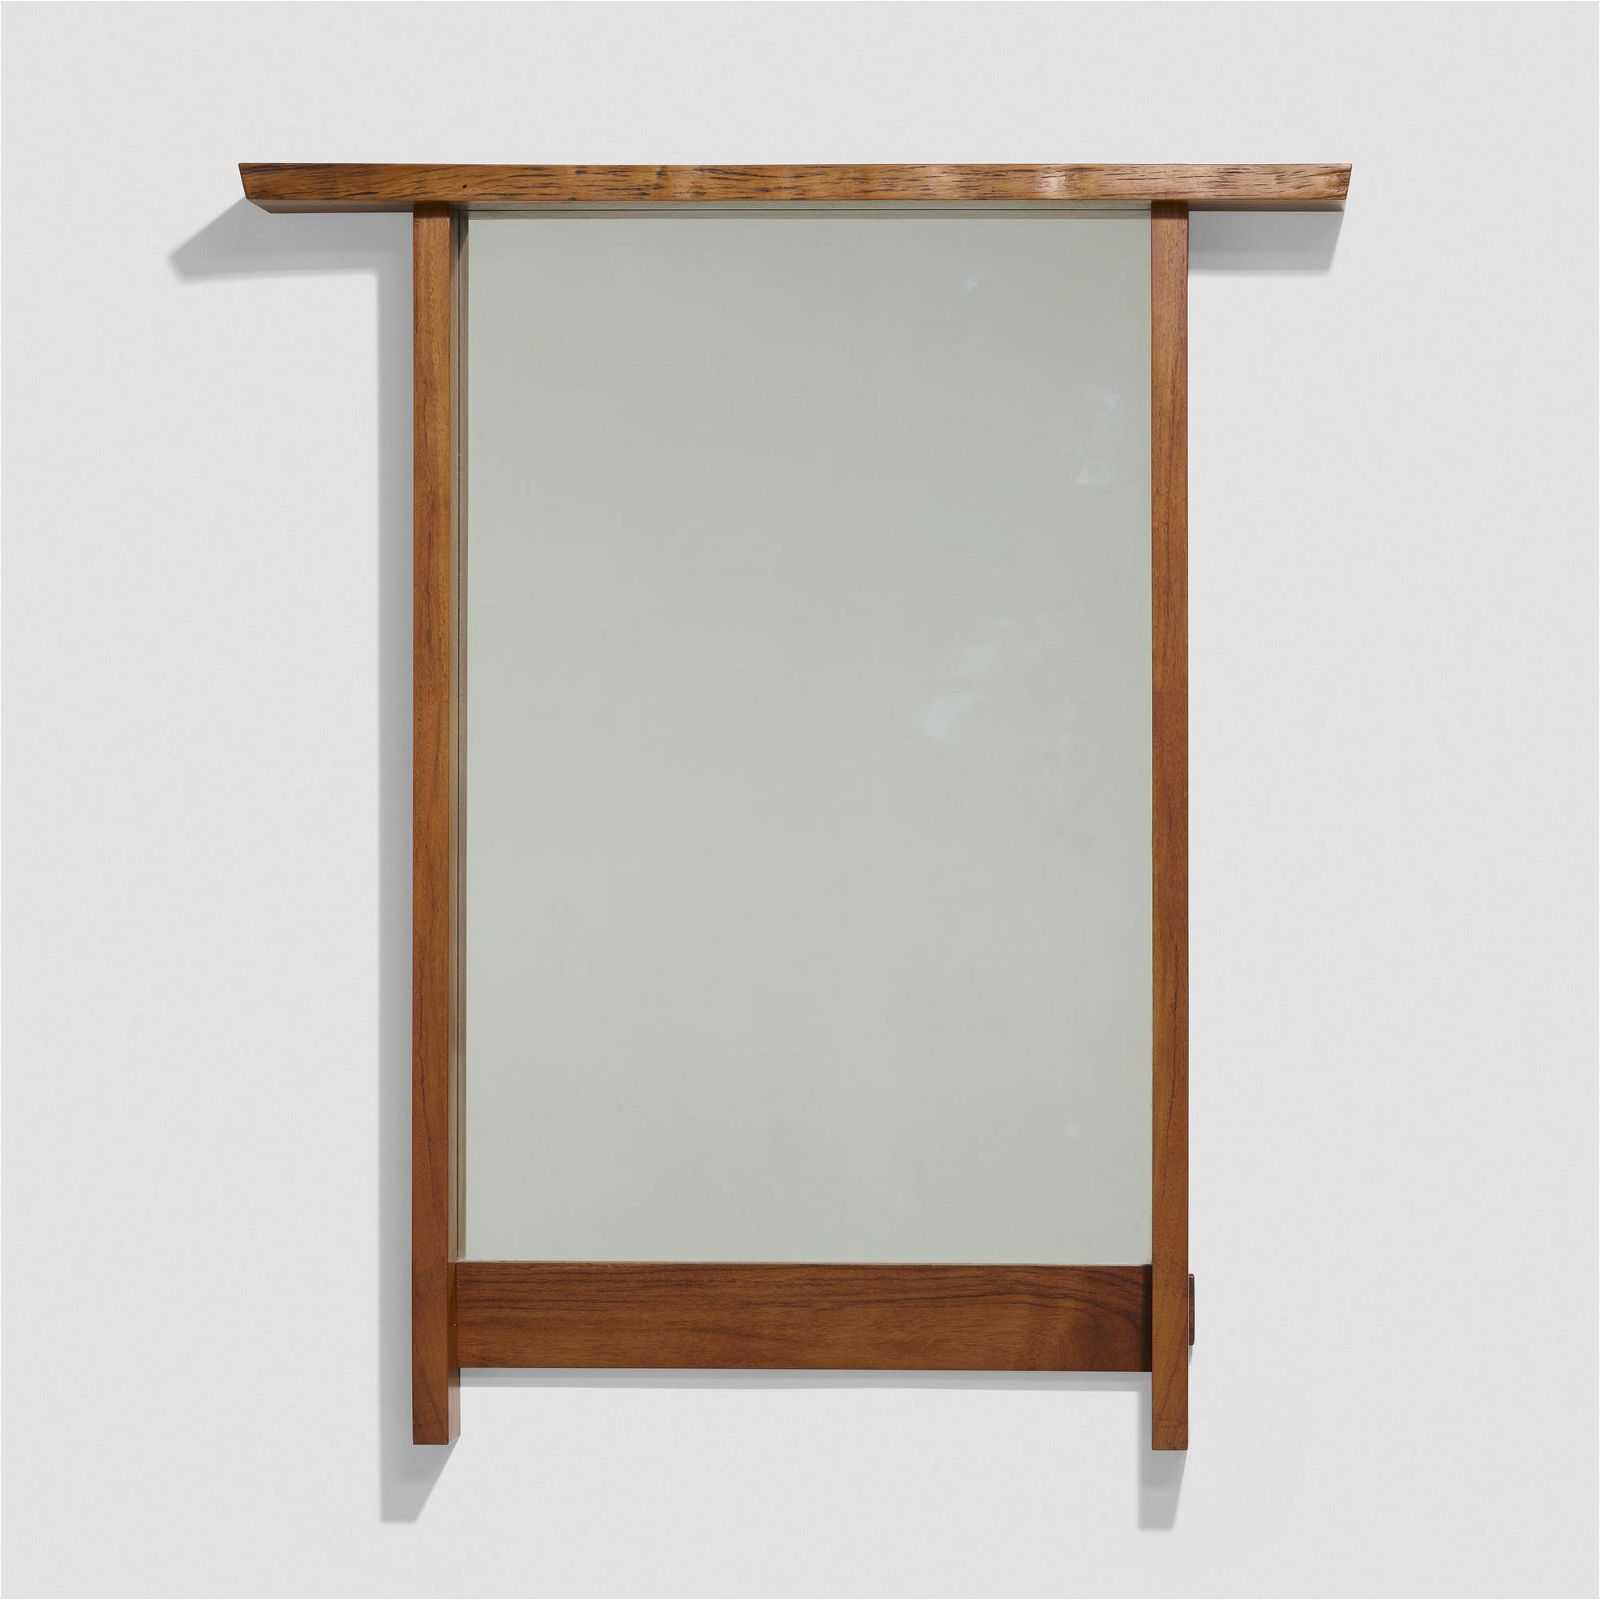 George Nakashima mirror dating to 1973 and having an East Indian rosewood frame, which sold for $11,000 plus the buyer’s premium in September 2022. Image courtesy of Rago Arts and Auction Center and LiveAuctioneers.